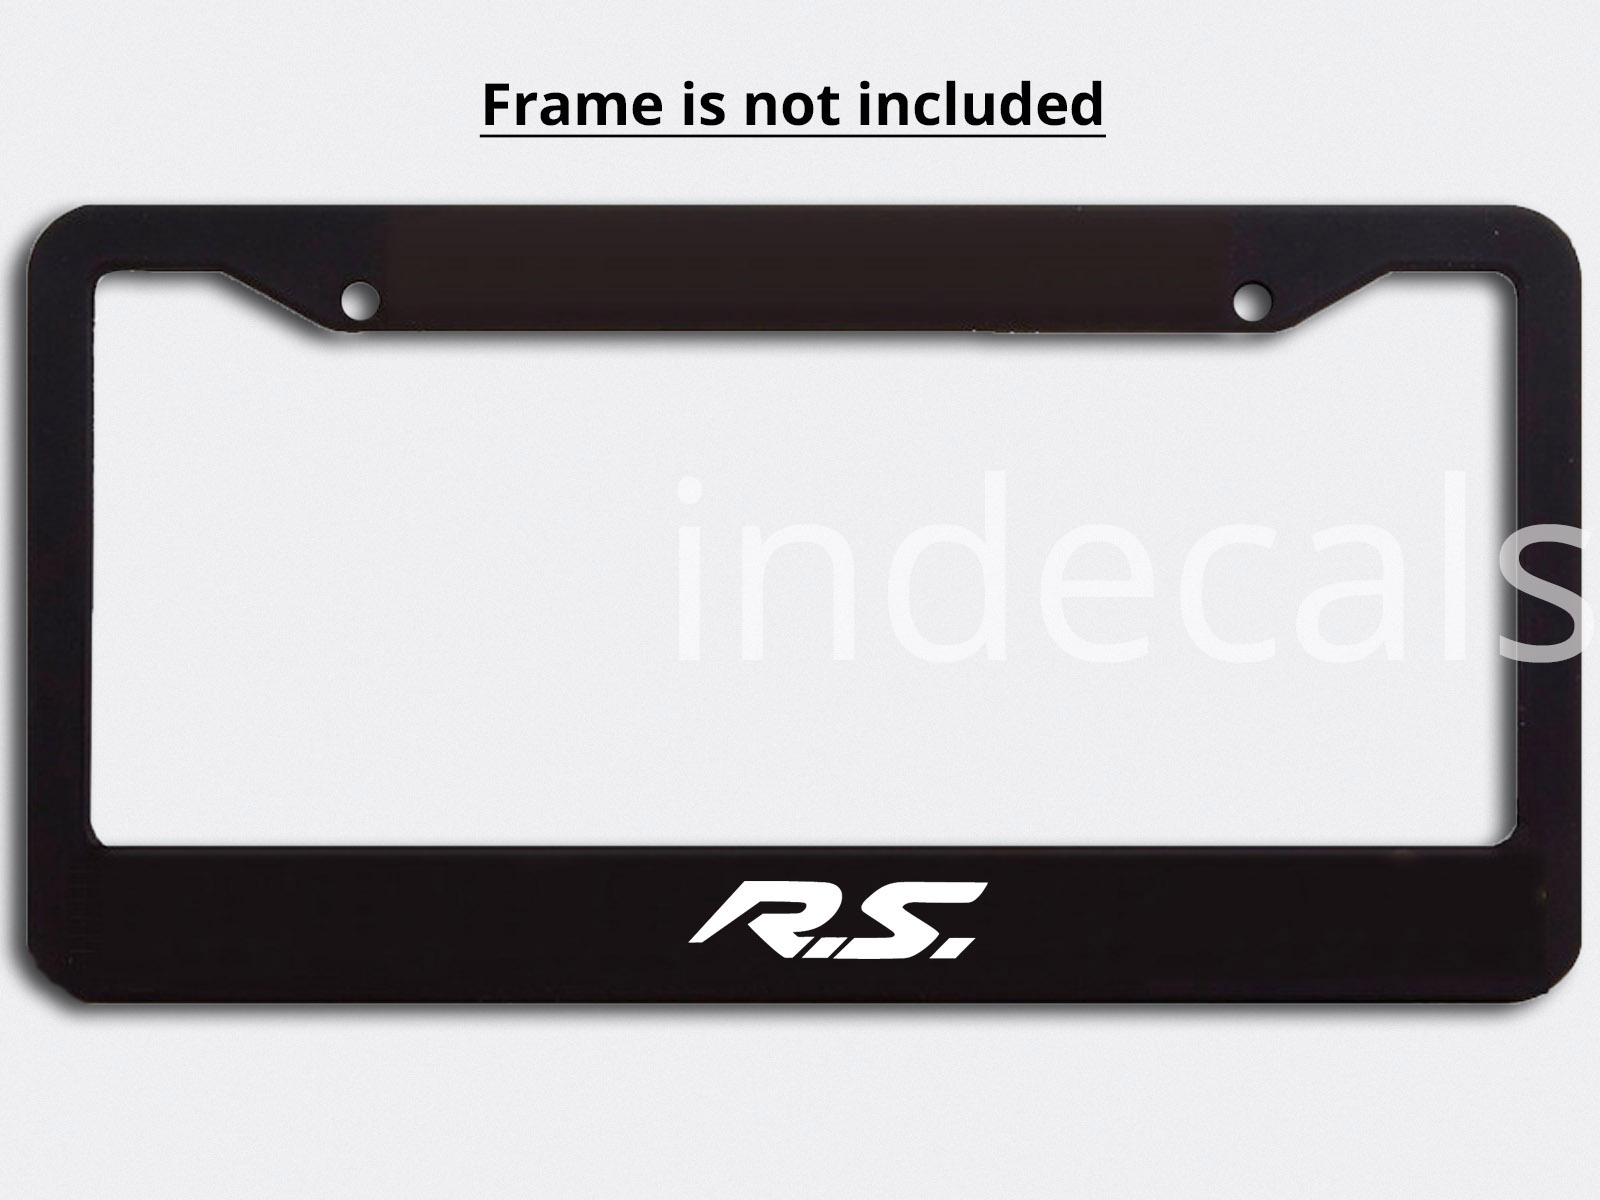 3 x Renault RS Stickers for License Plate Frame - White